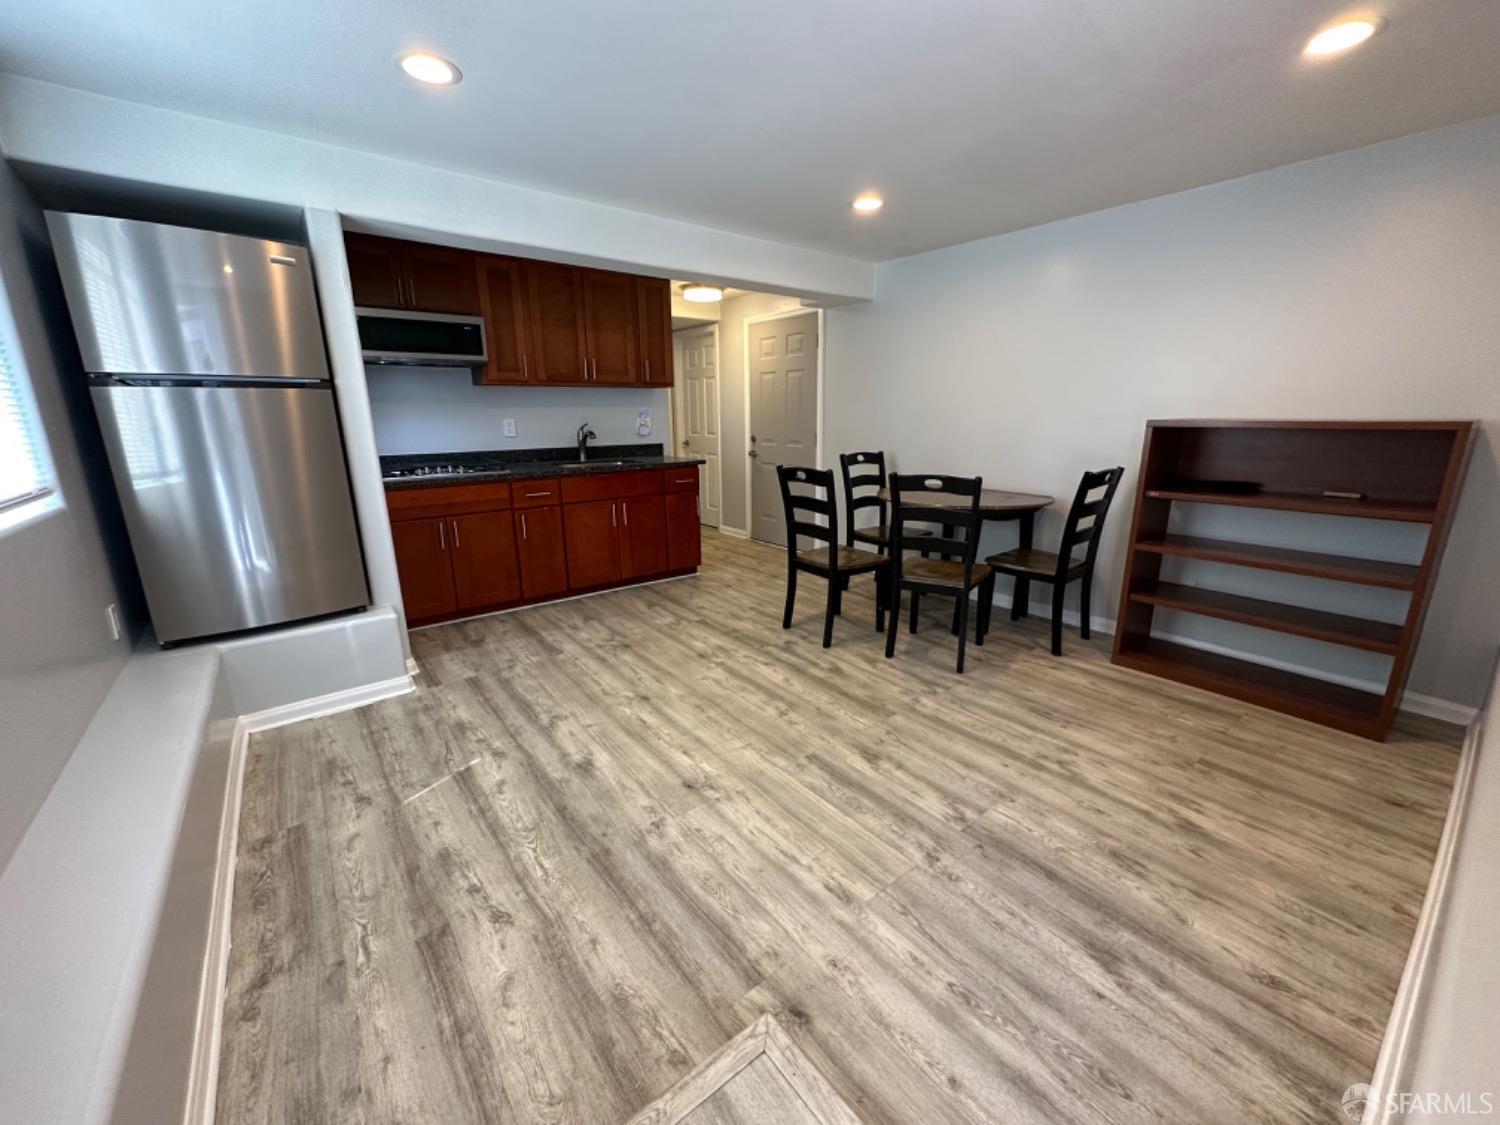 a kitchen with stainless steel appliances wooden floor and chairs